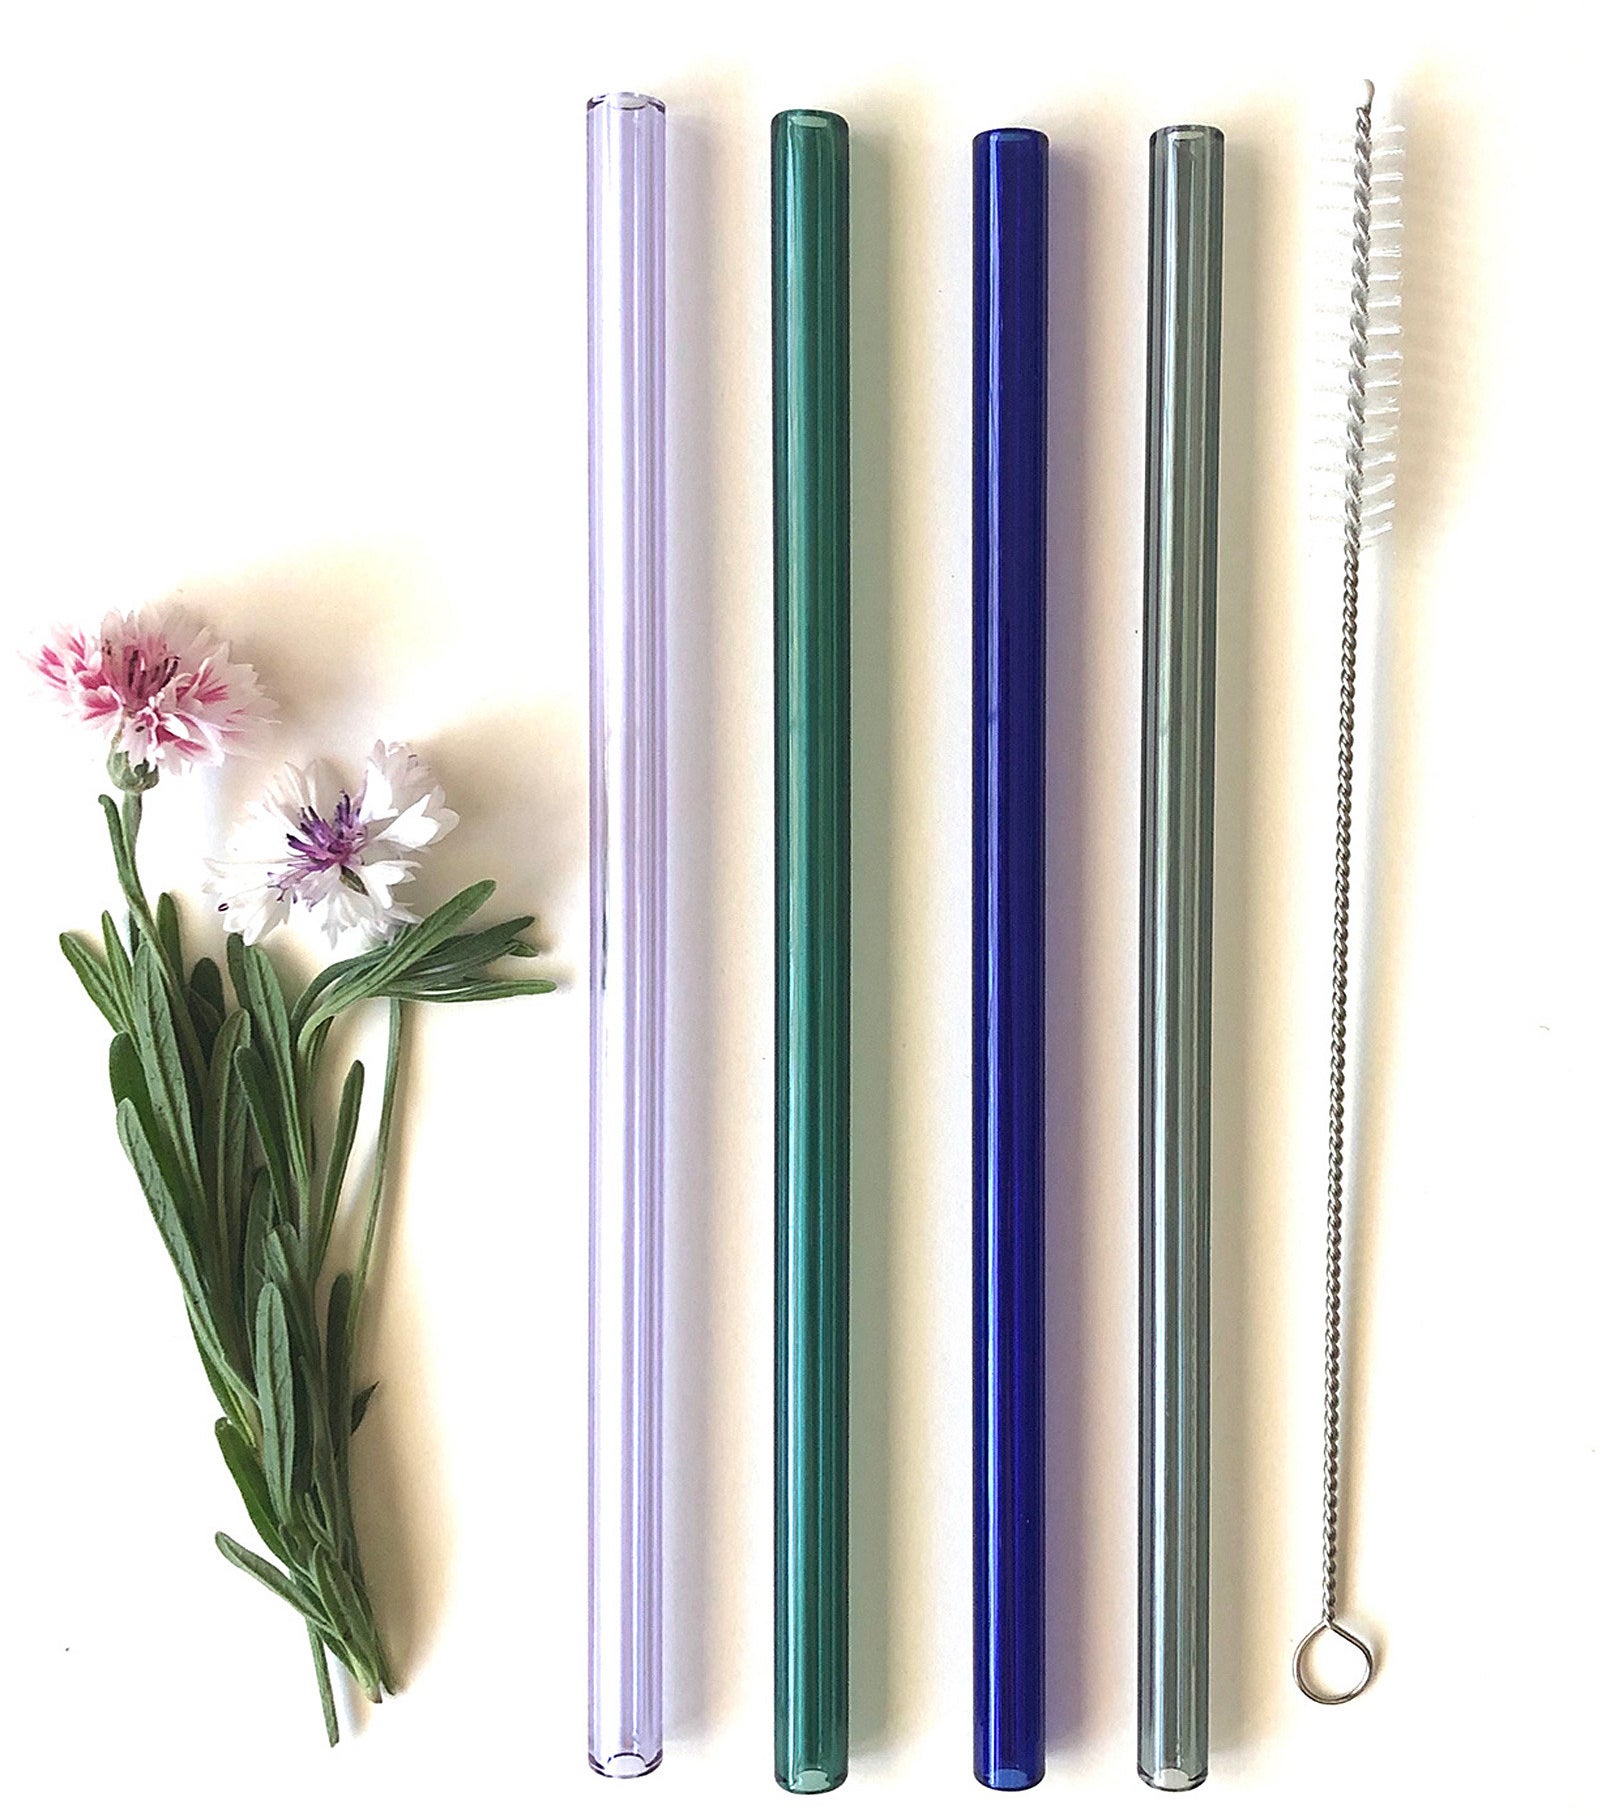 A set of four glass straws and a small cleaning brush on a plain background